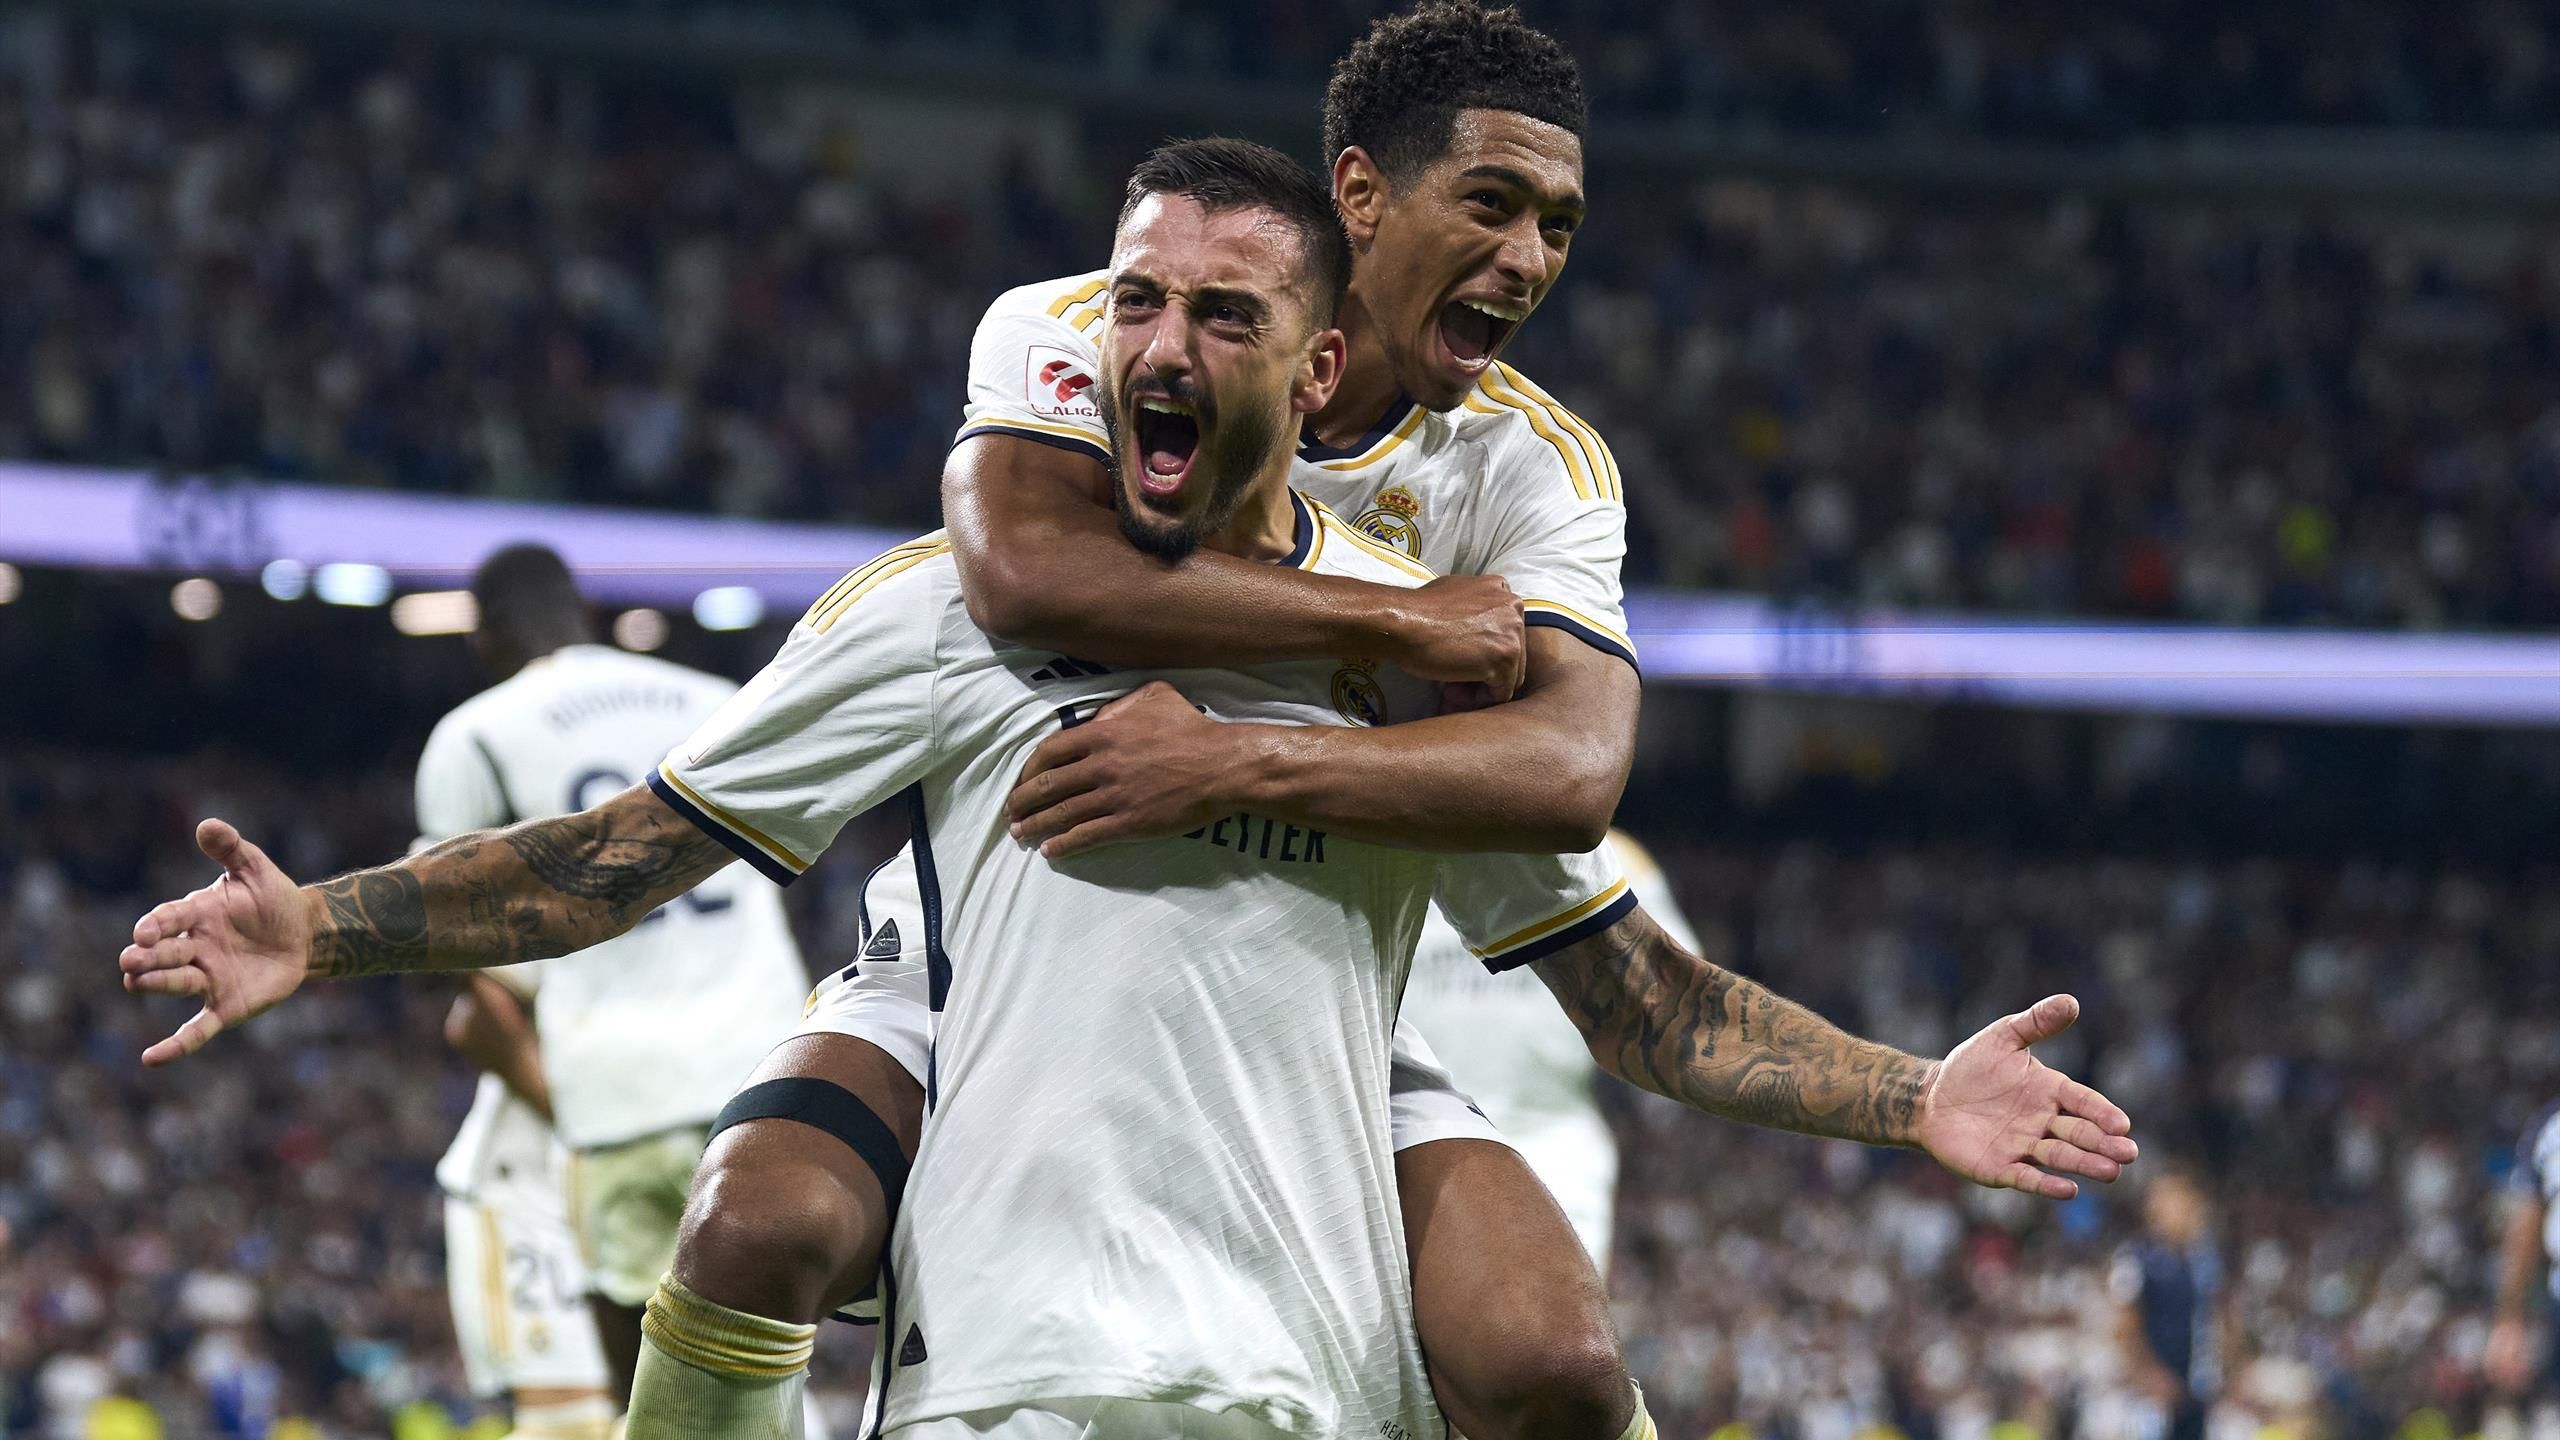 Real Madrid come from behind to beat Real Sociedad